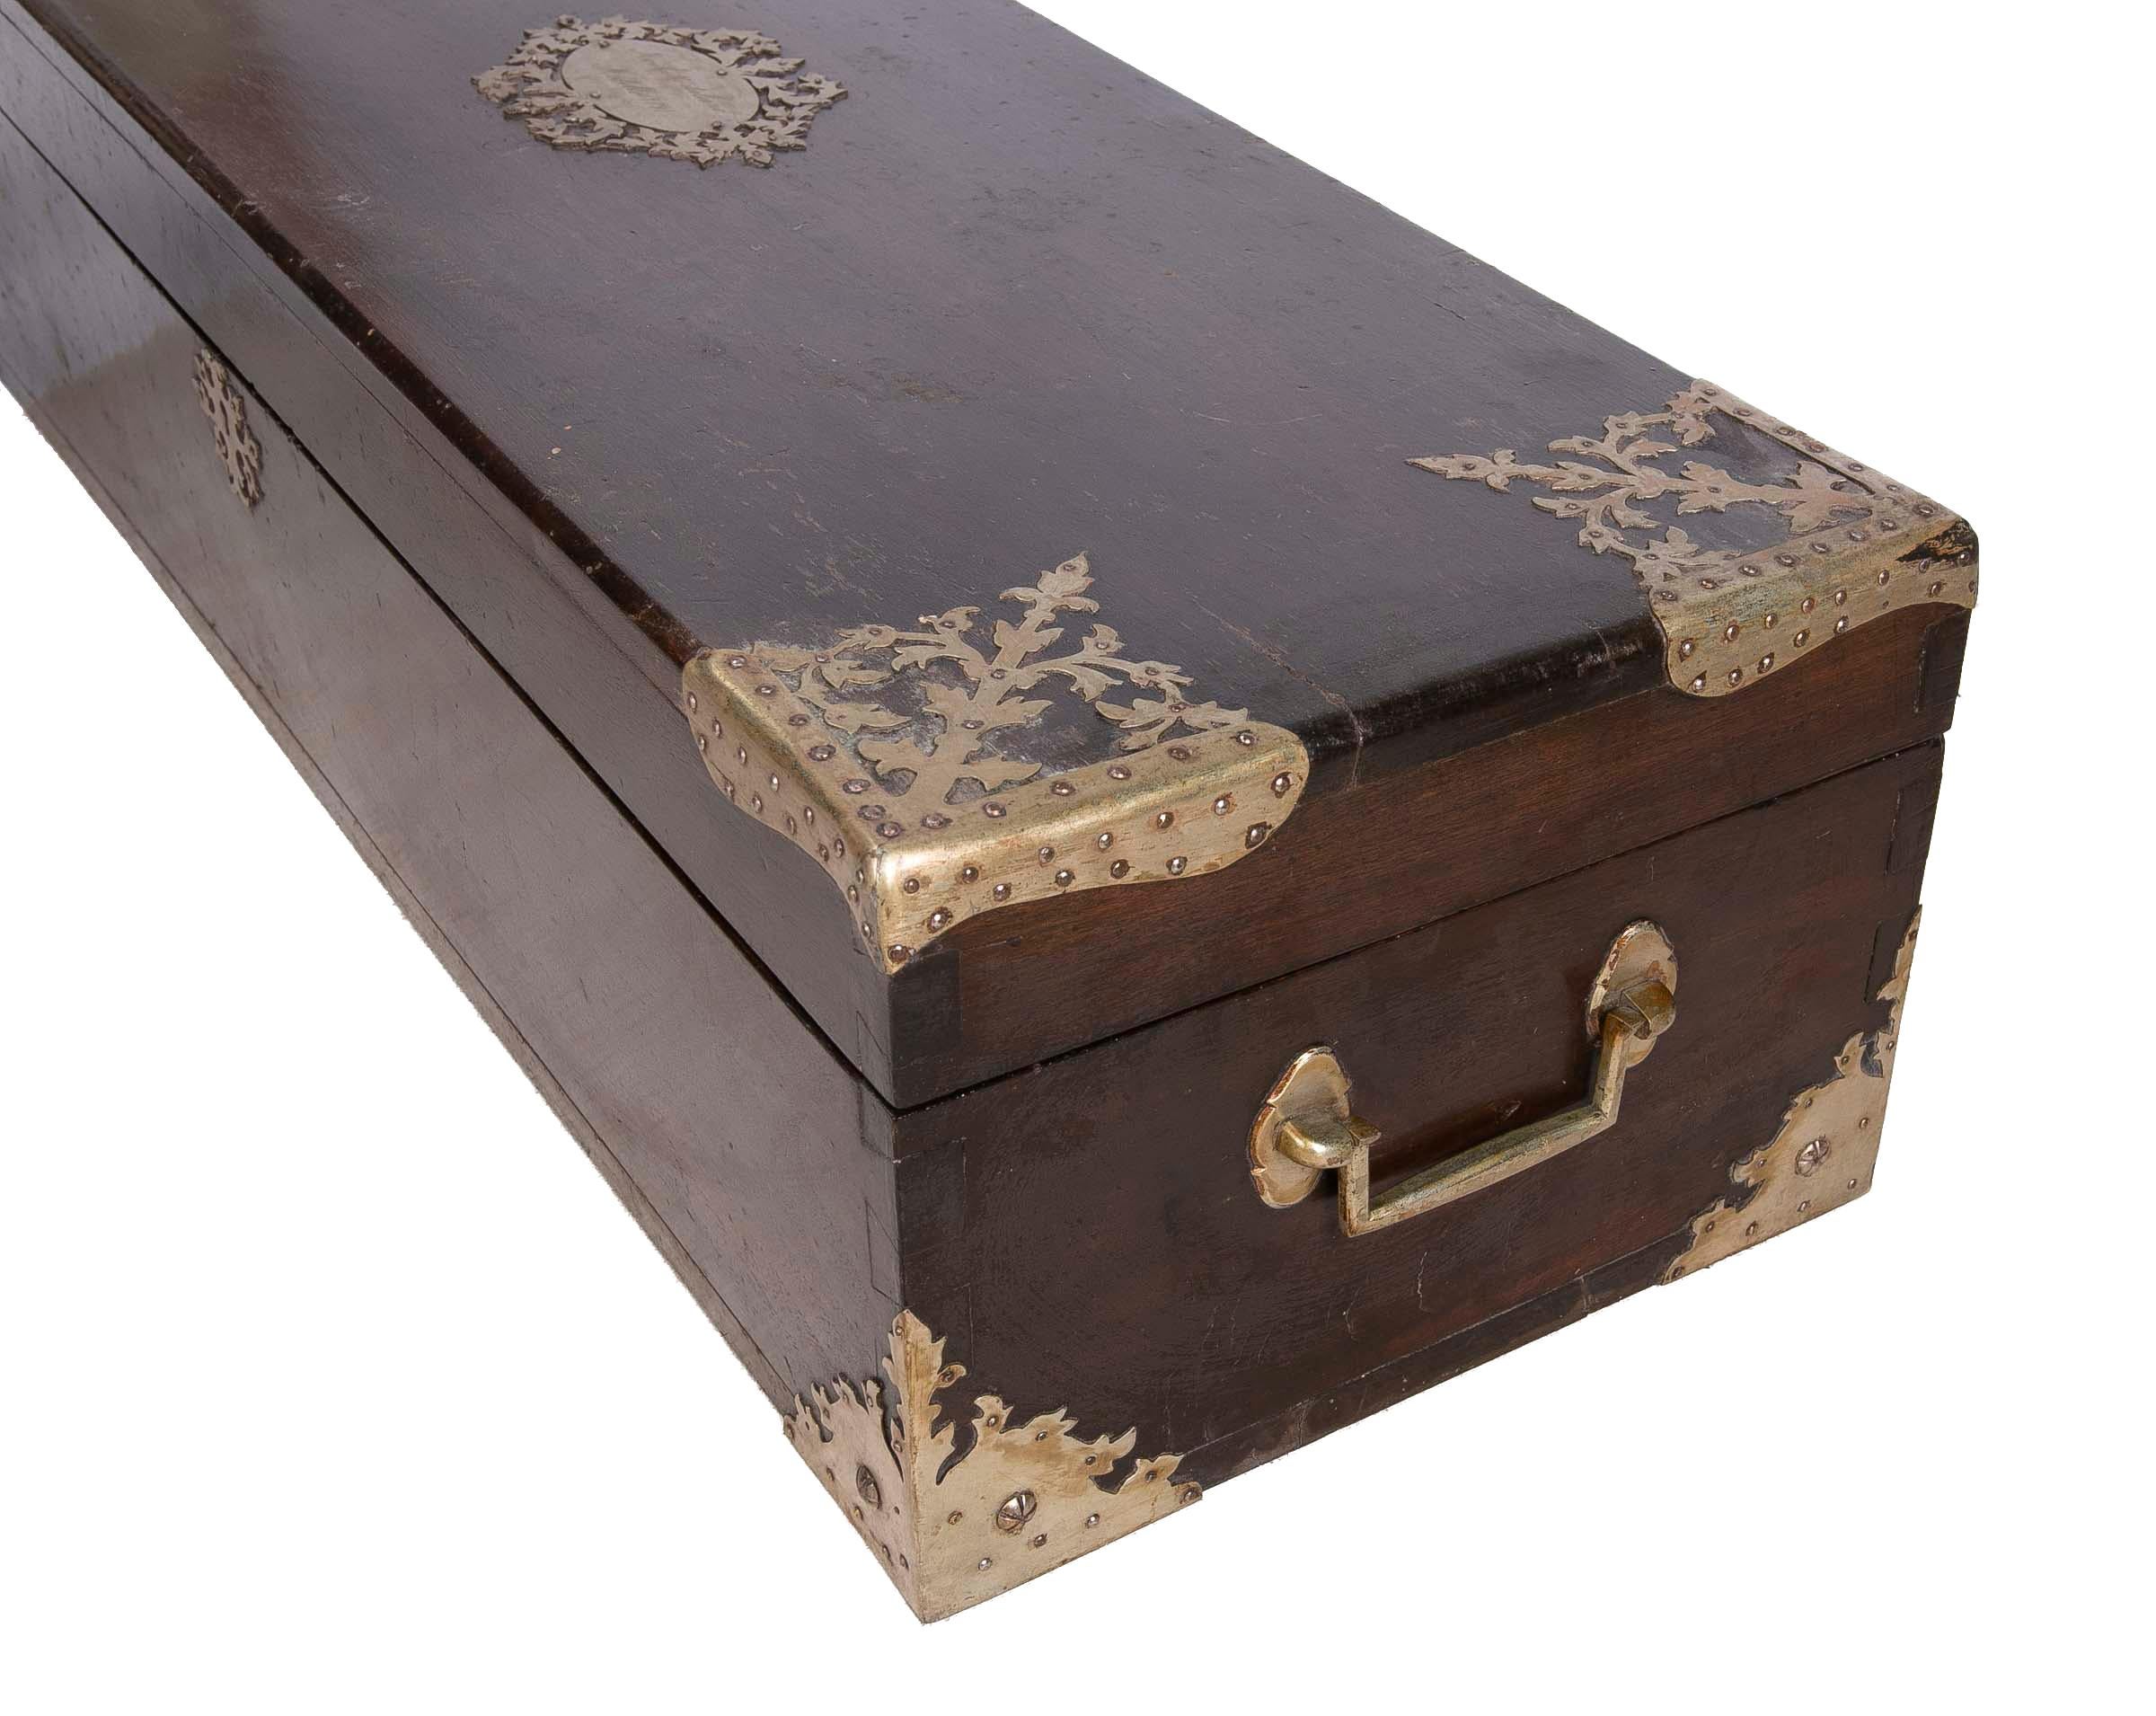 Italian Rectangular Wooden Box with Metal Decorations and Inscription dated 1891 For Sale 8